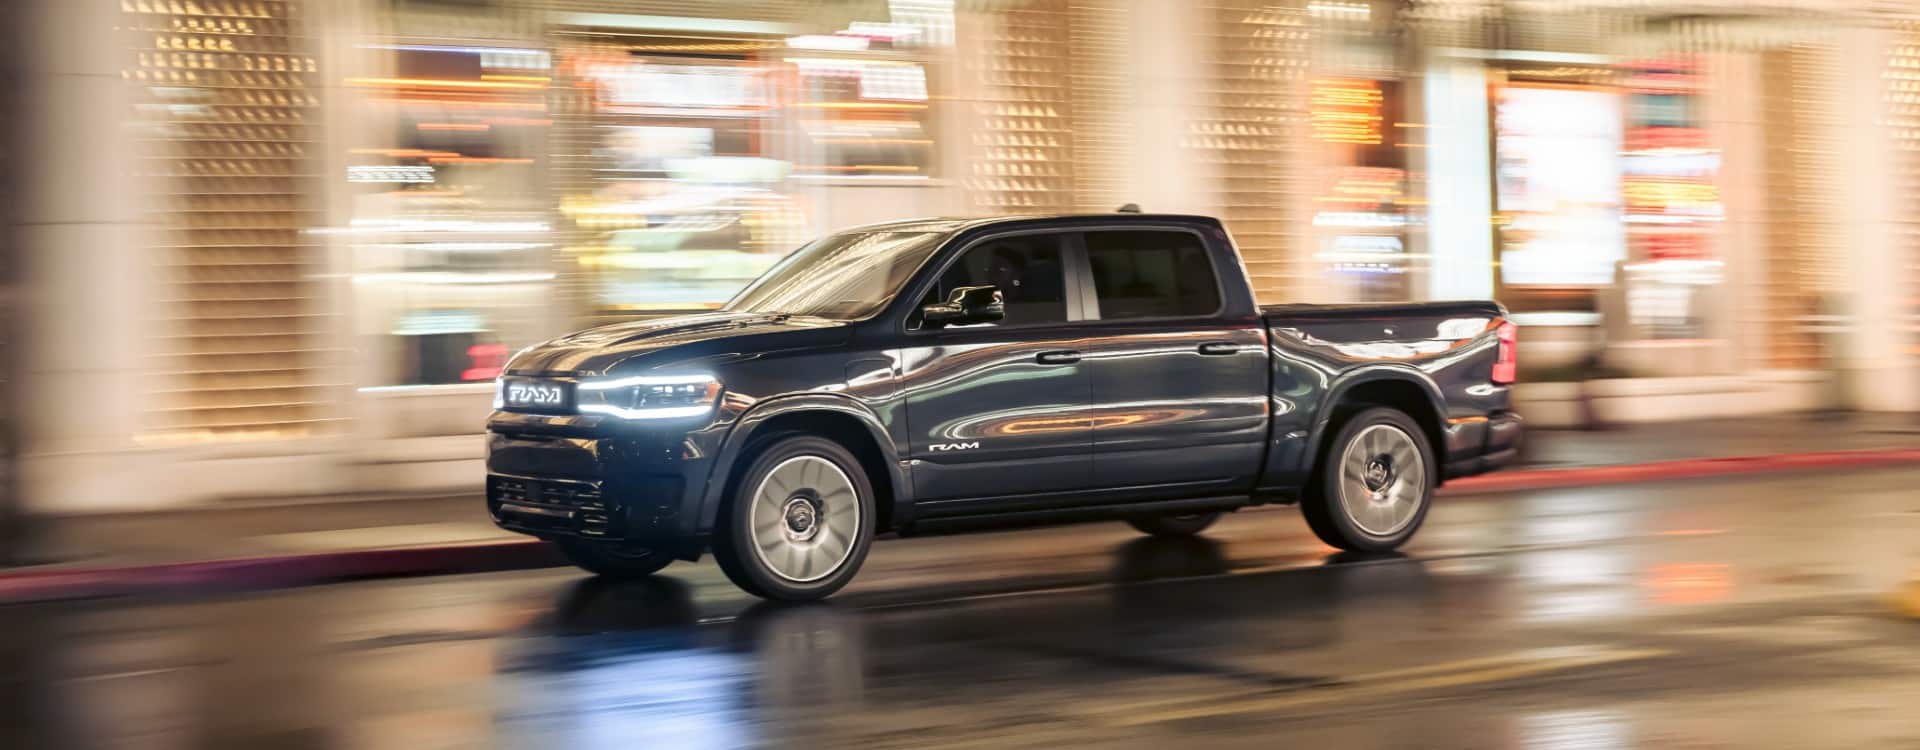 A gray 2025 Ram 1500 Rev Tungsten being driven at night on a city street bathed in lights. The background is blurred to indicate the vehicle is in motion.